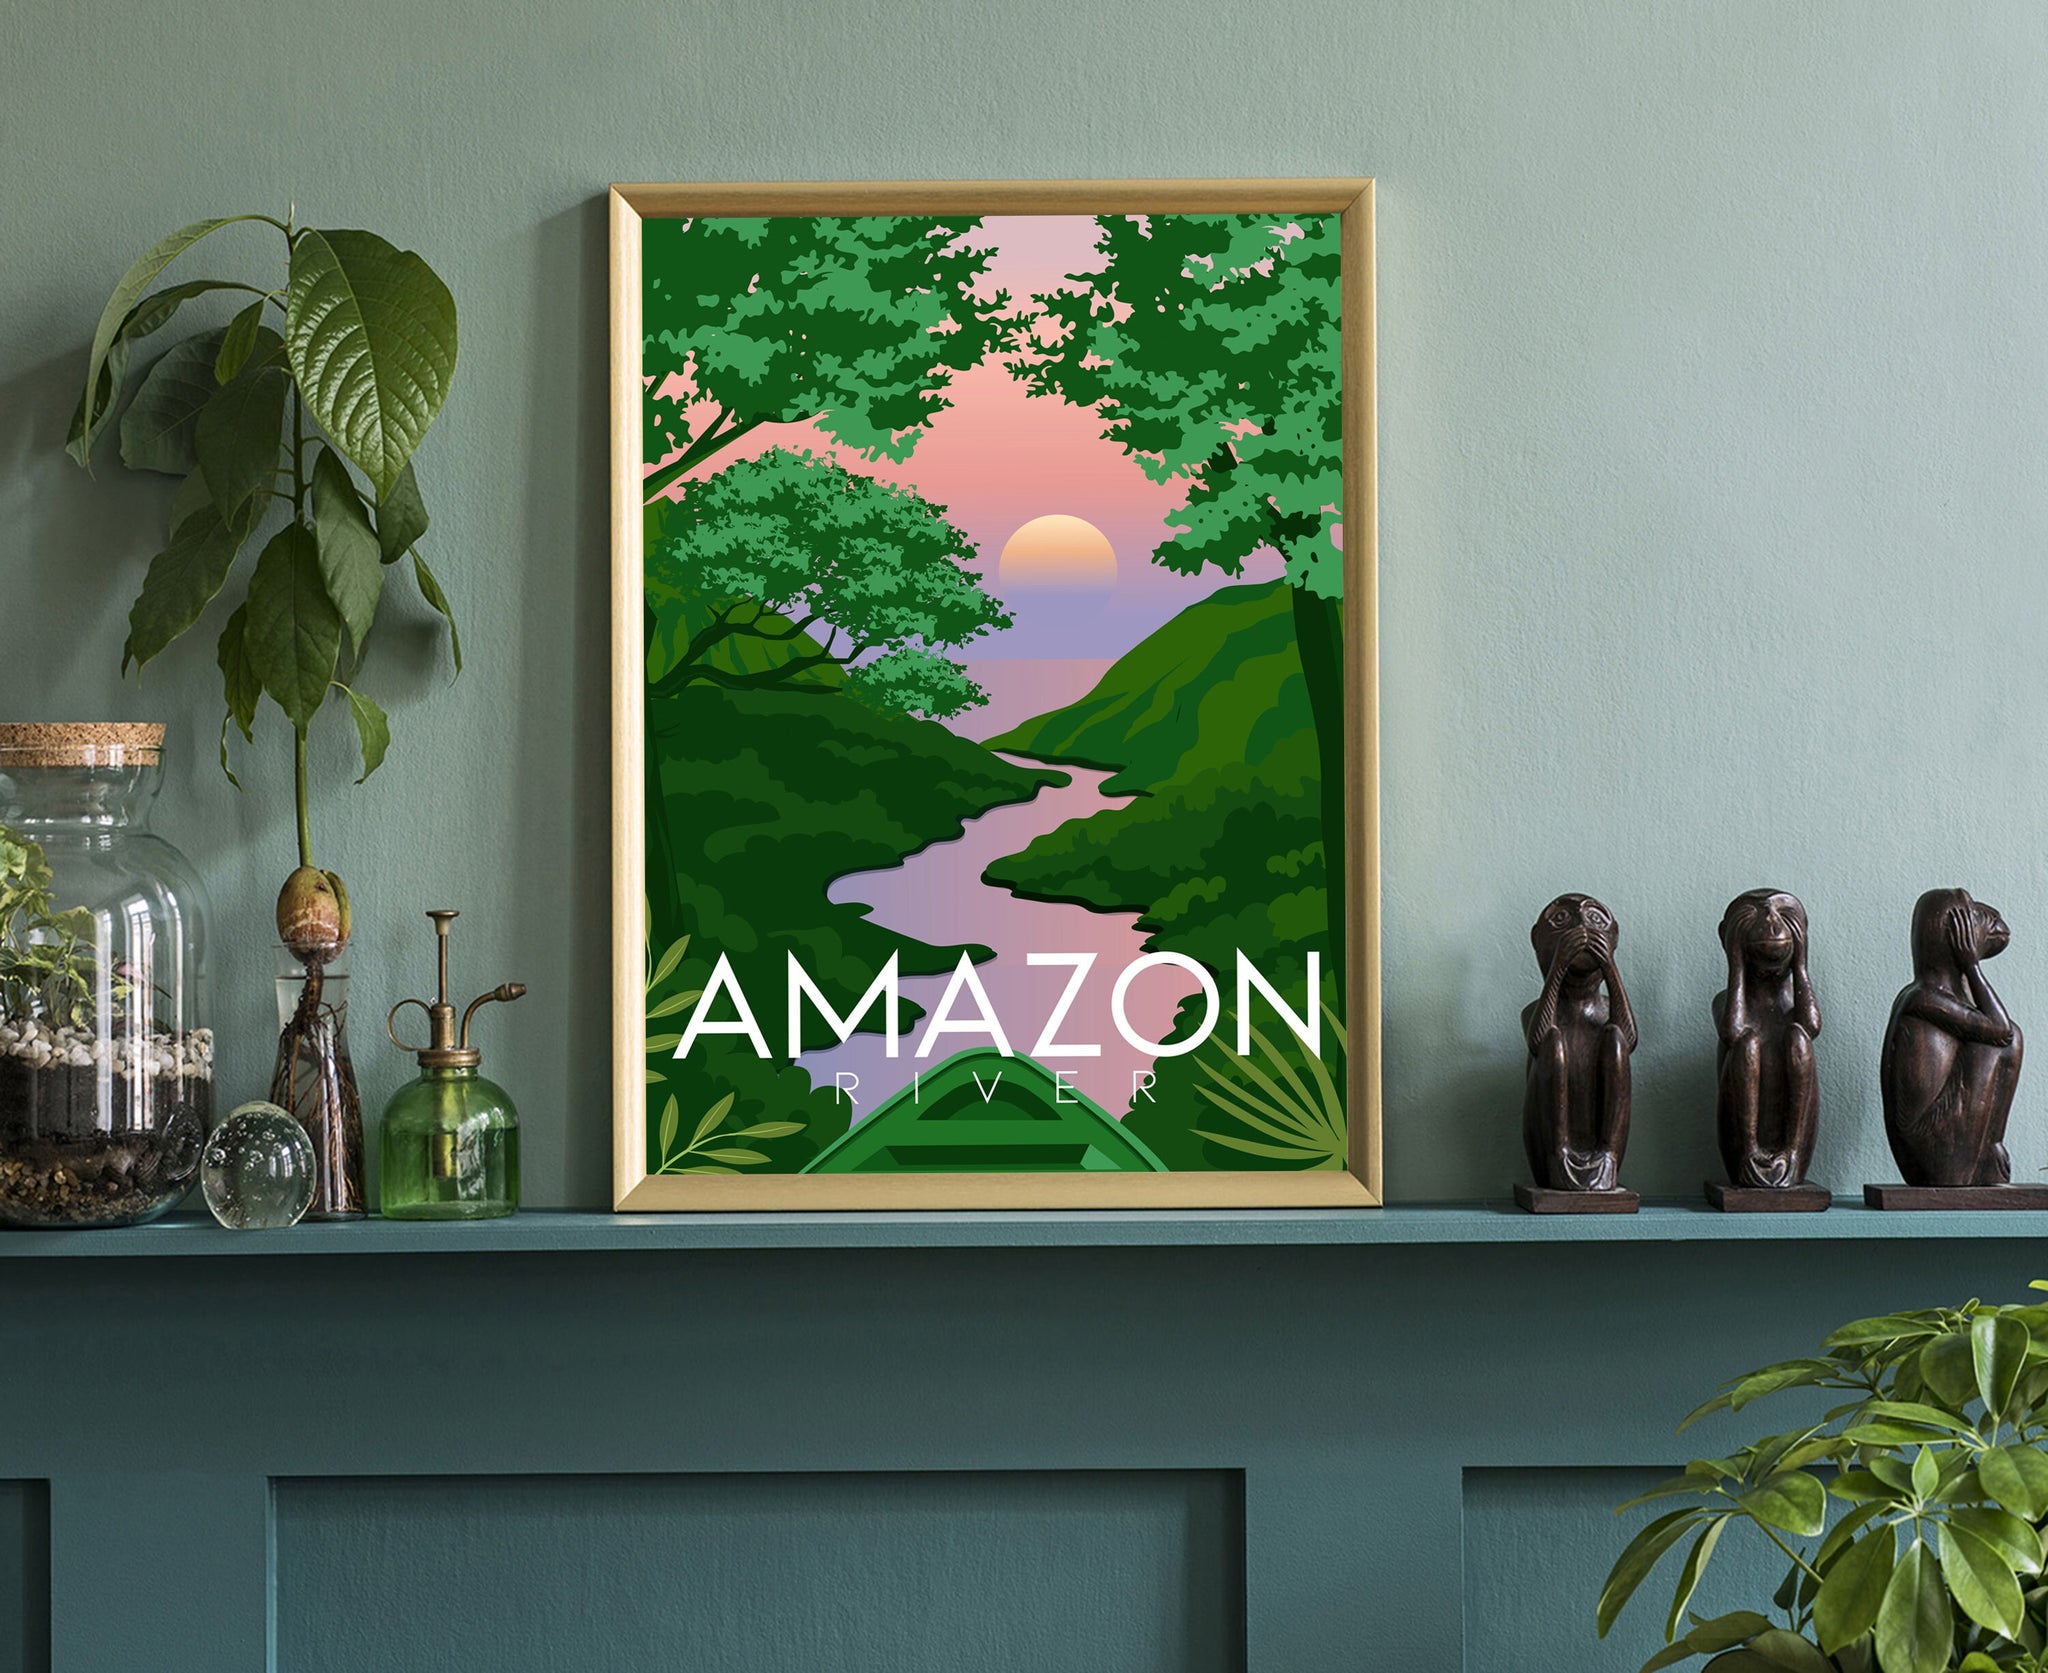 Amazon retro style travel poster, Rustic poster print, Home wall art, Office wall decorations, Amazon map posters, Christmas gift